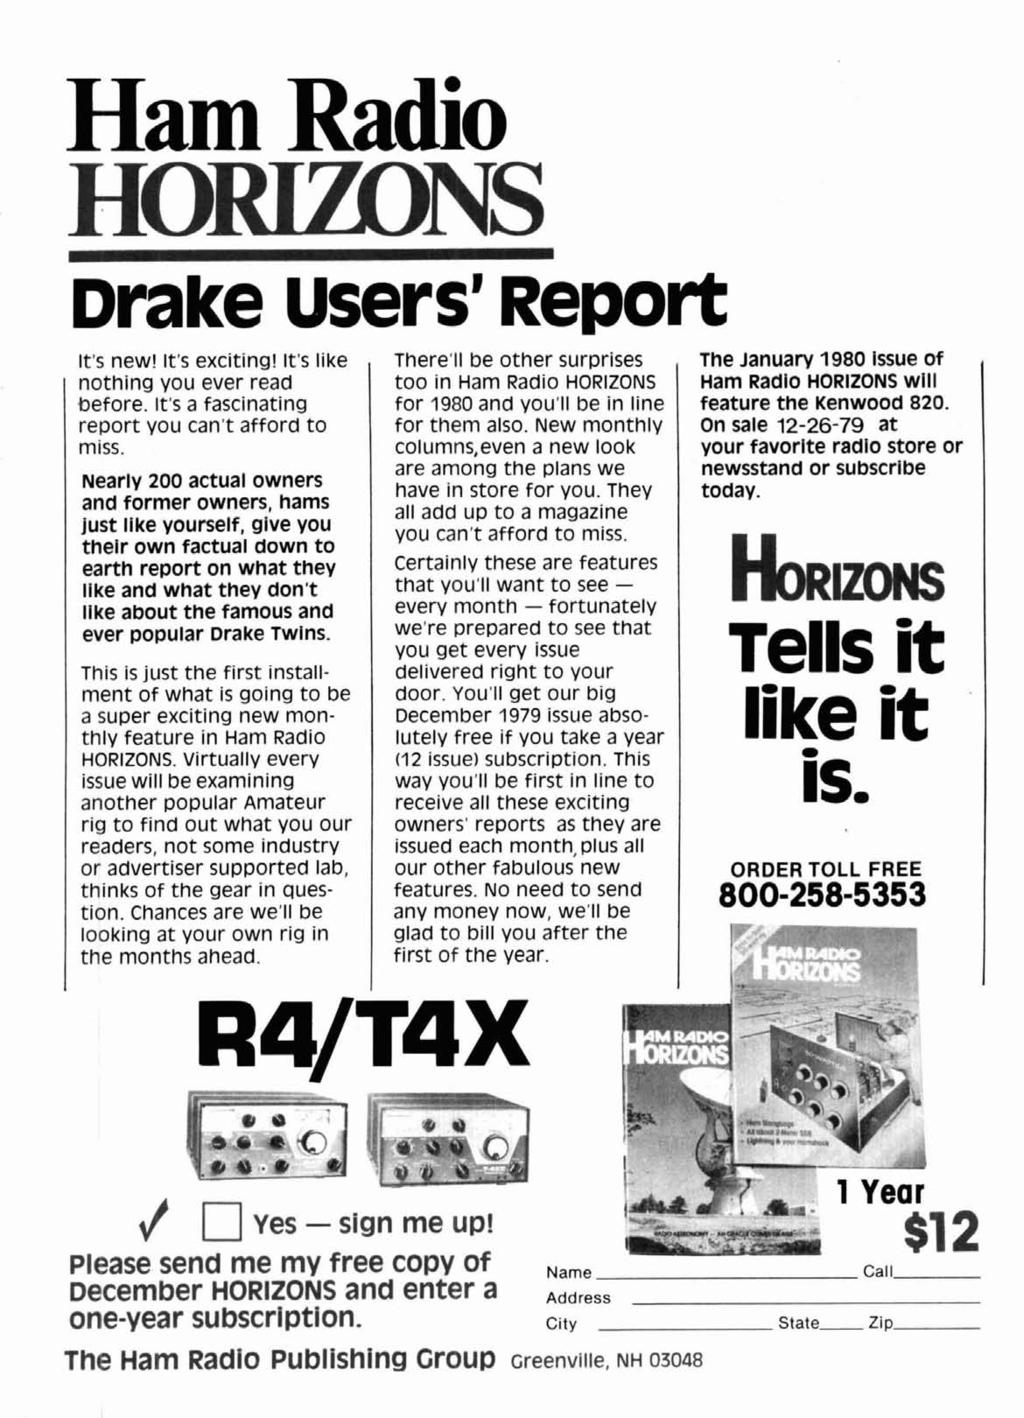 Ham Radio Drake Users' Report It's new! It's exciting! It's like nothing you ever read before. It's a fascinating report you can't afford to miss.